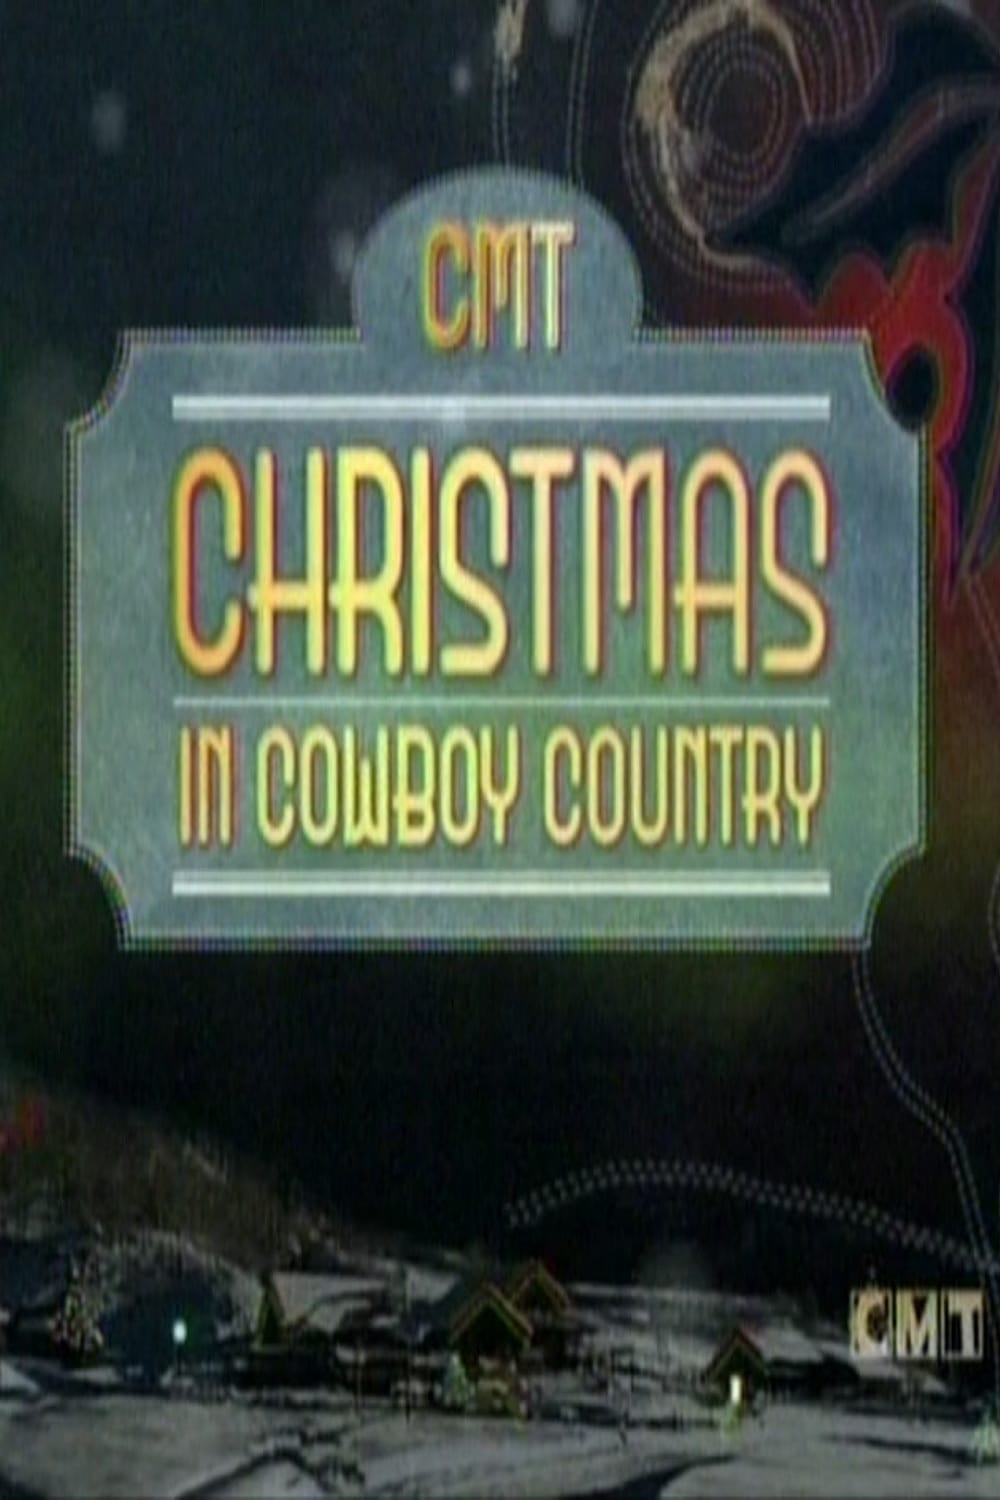 Christmas in Cowboy Country